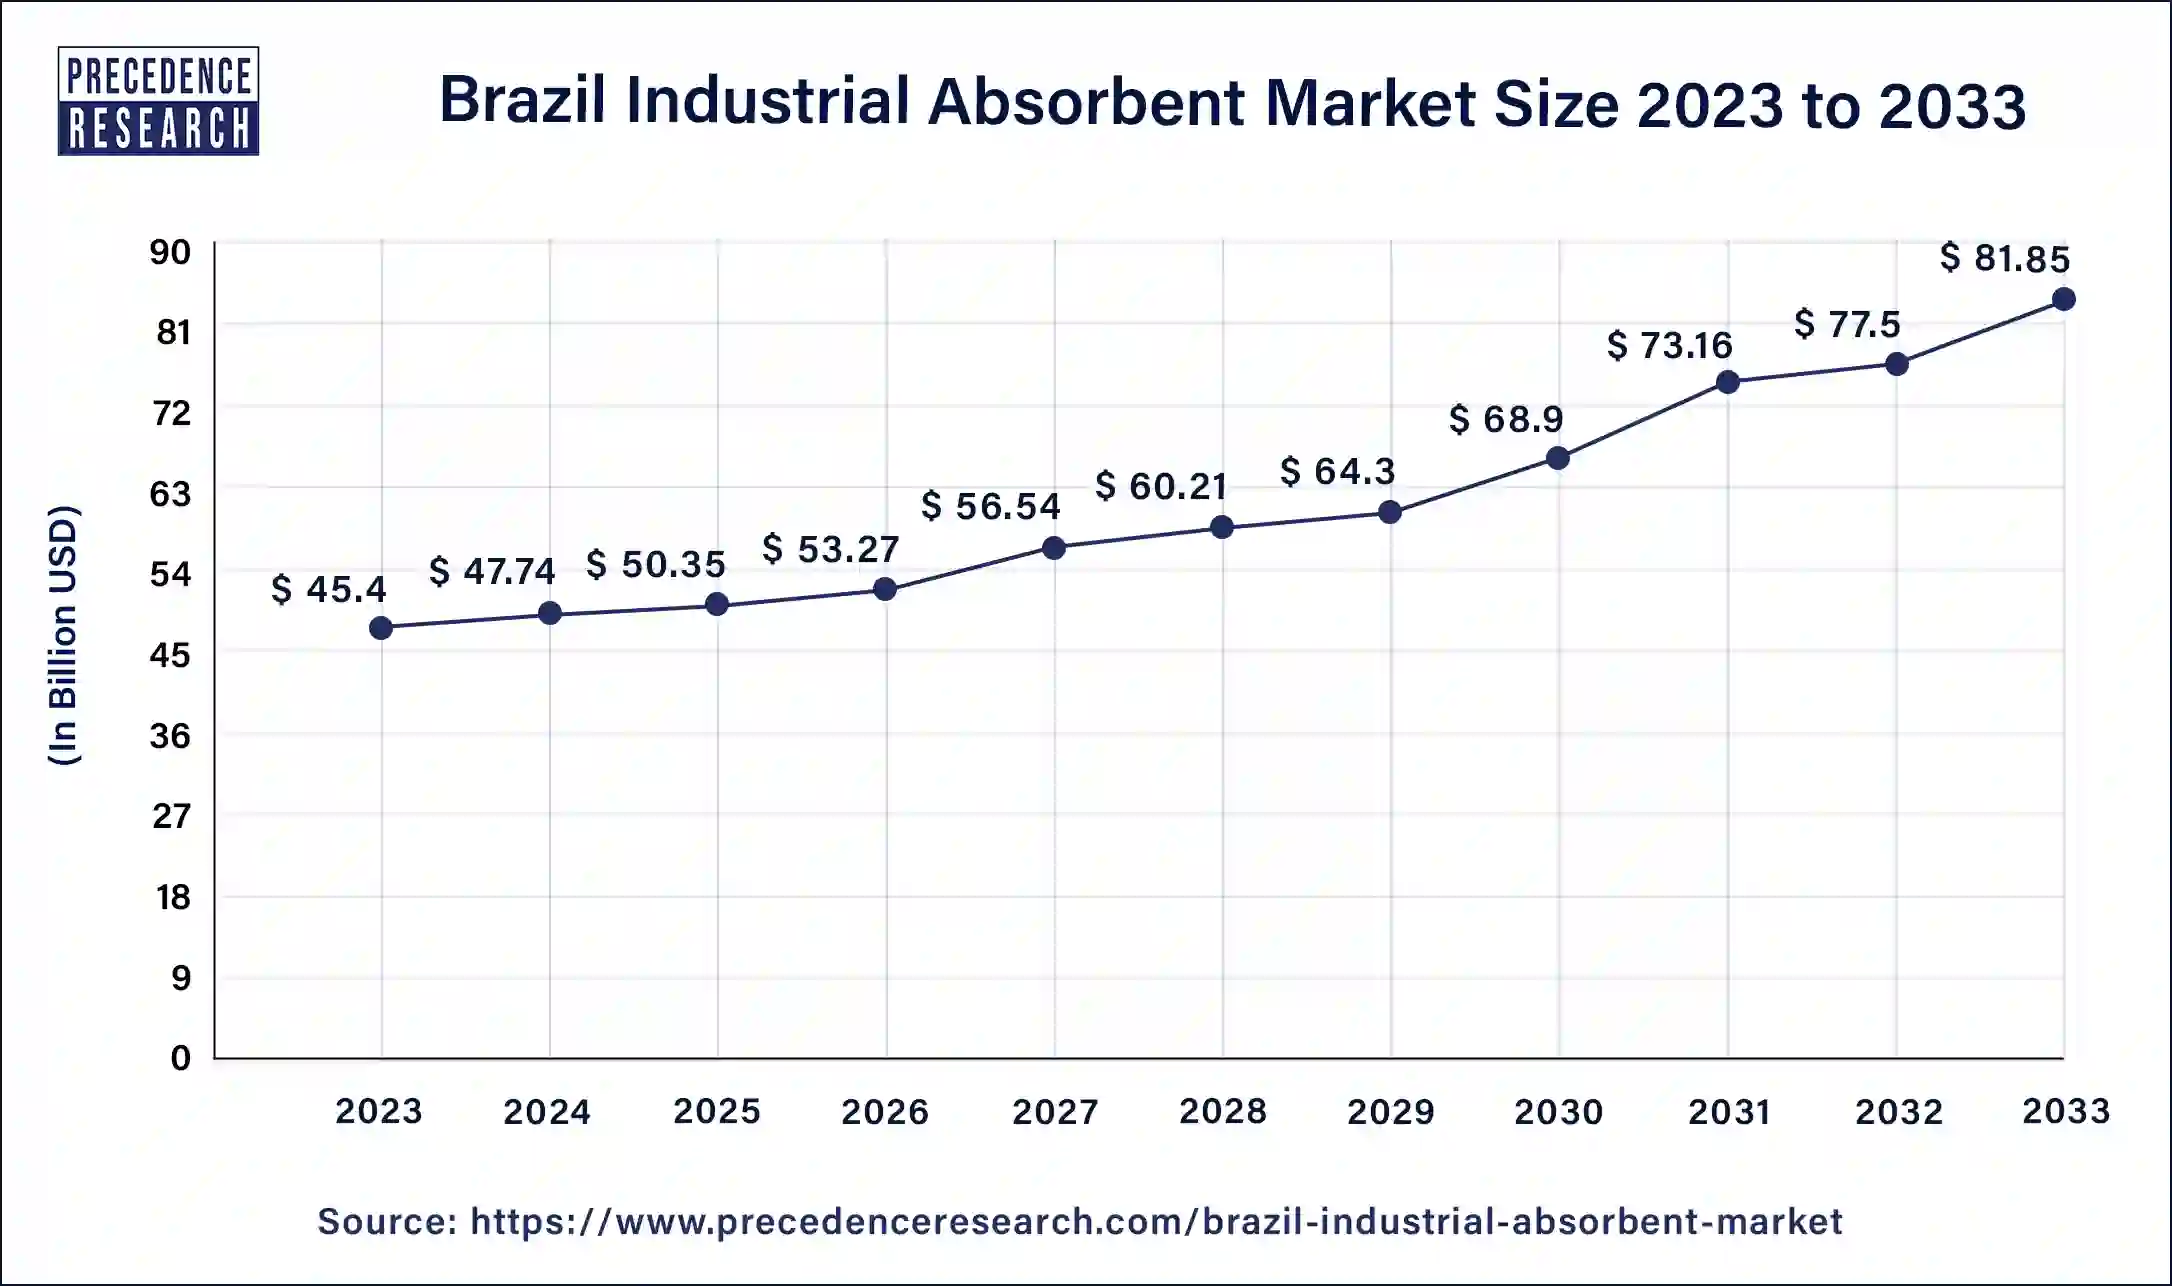 Brazil Industrial Absorbent Market Size 2024 to 2033